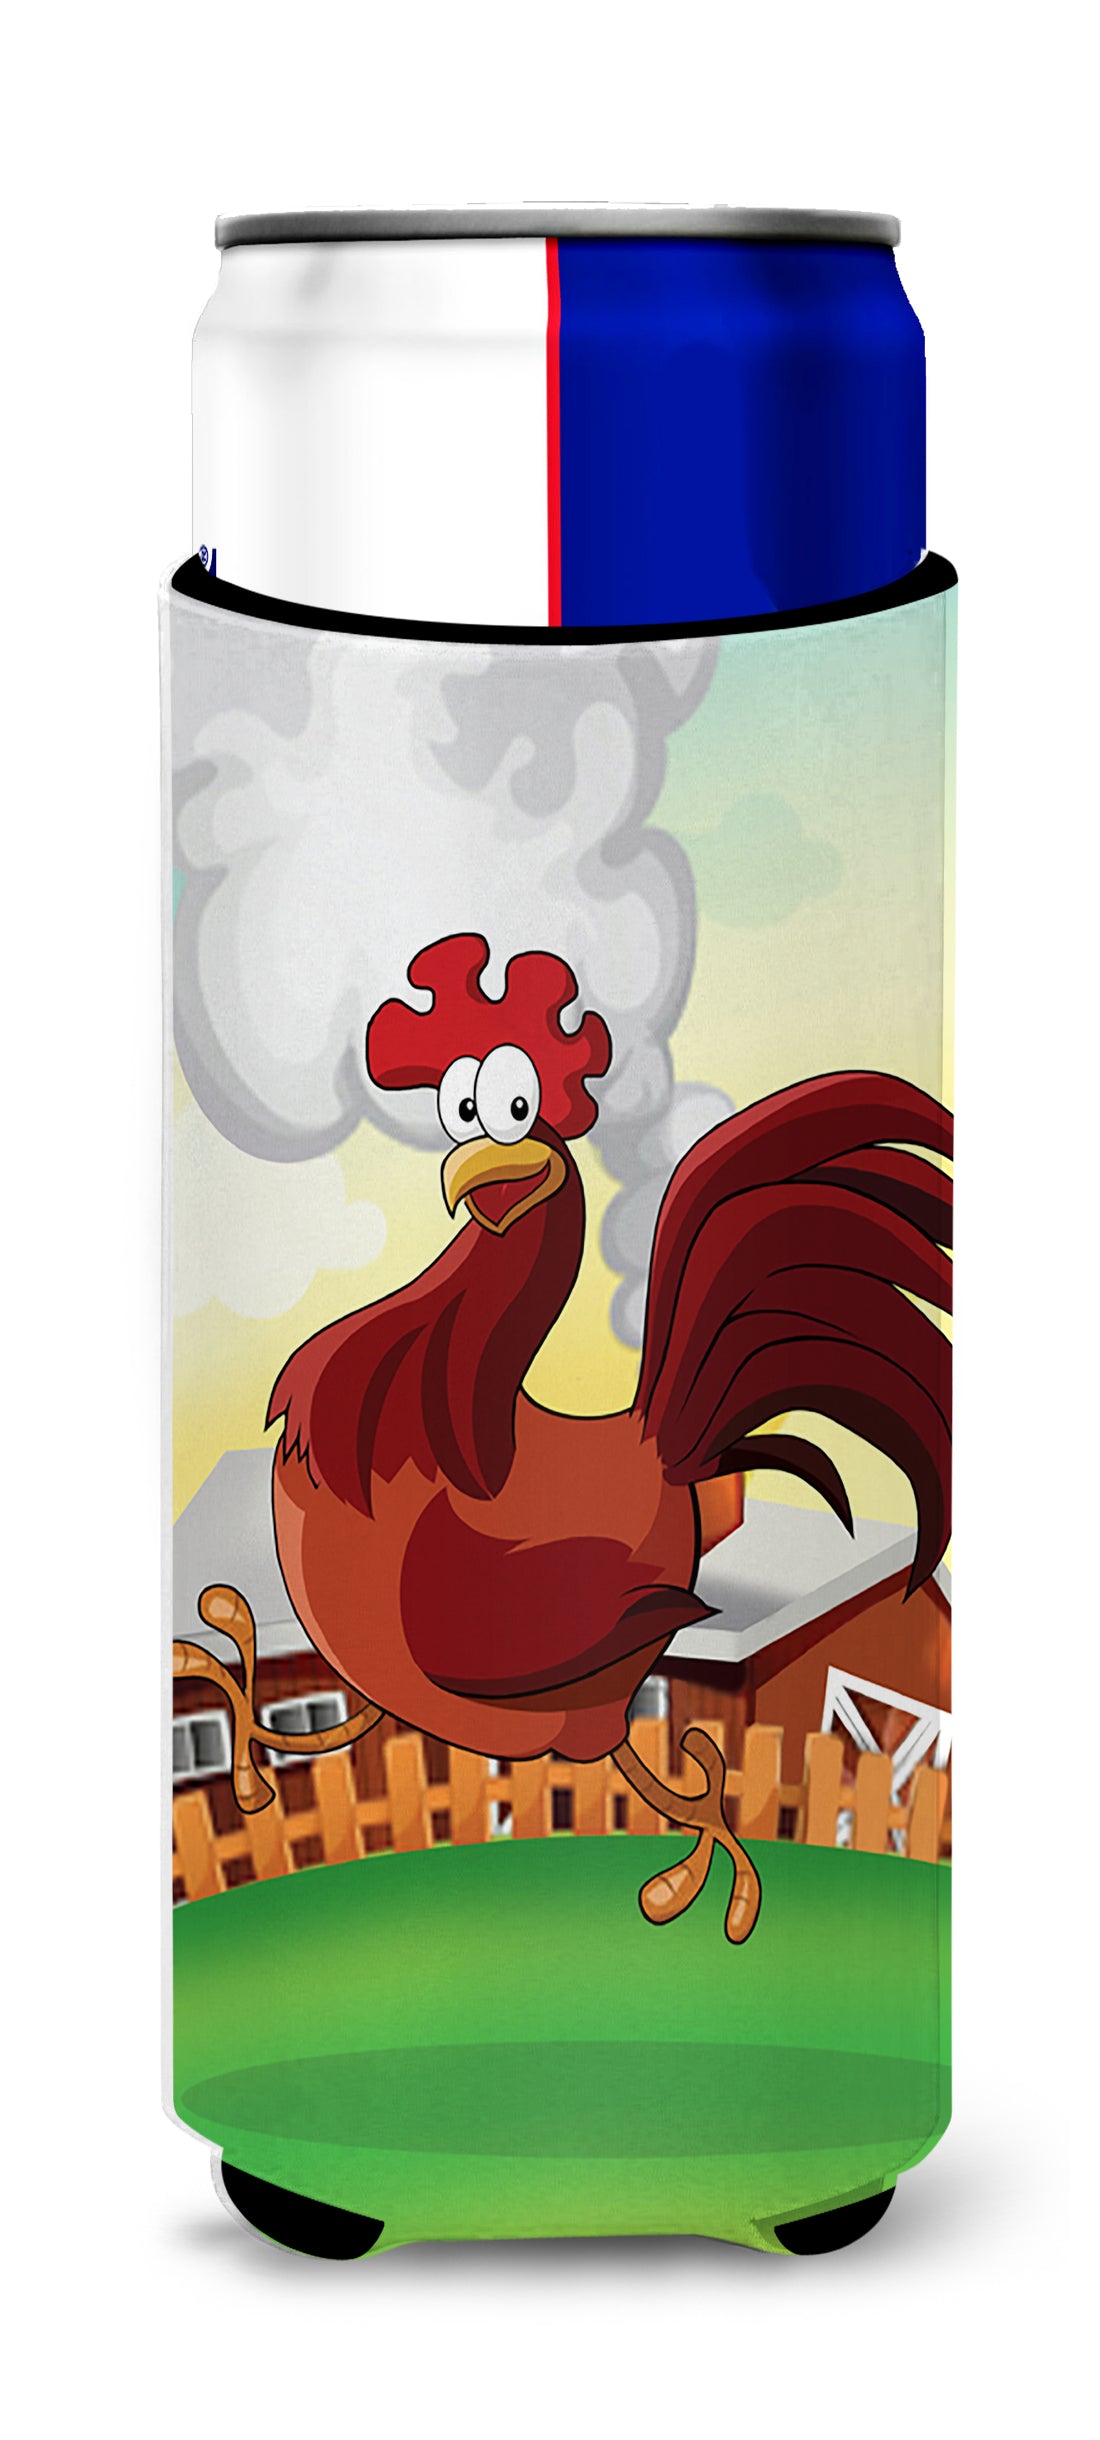 Rooster Chicken on the Run  Ultra Beverage Insulators for slim cans APH7630MUK